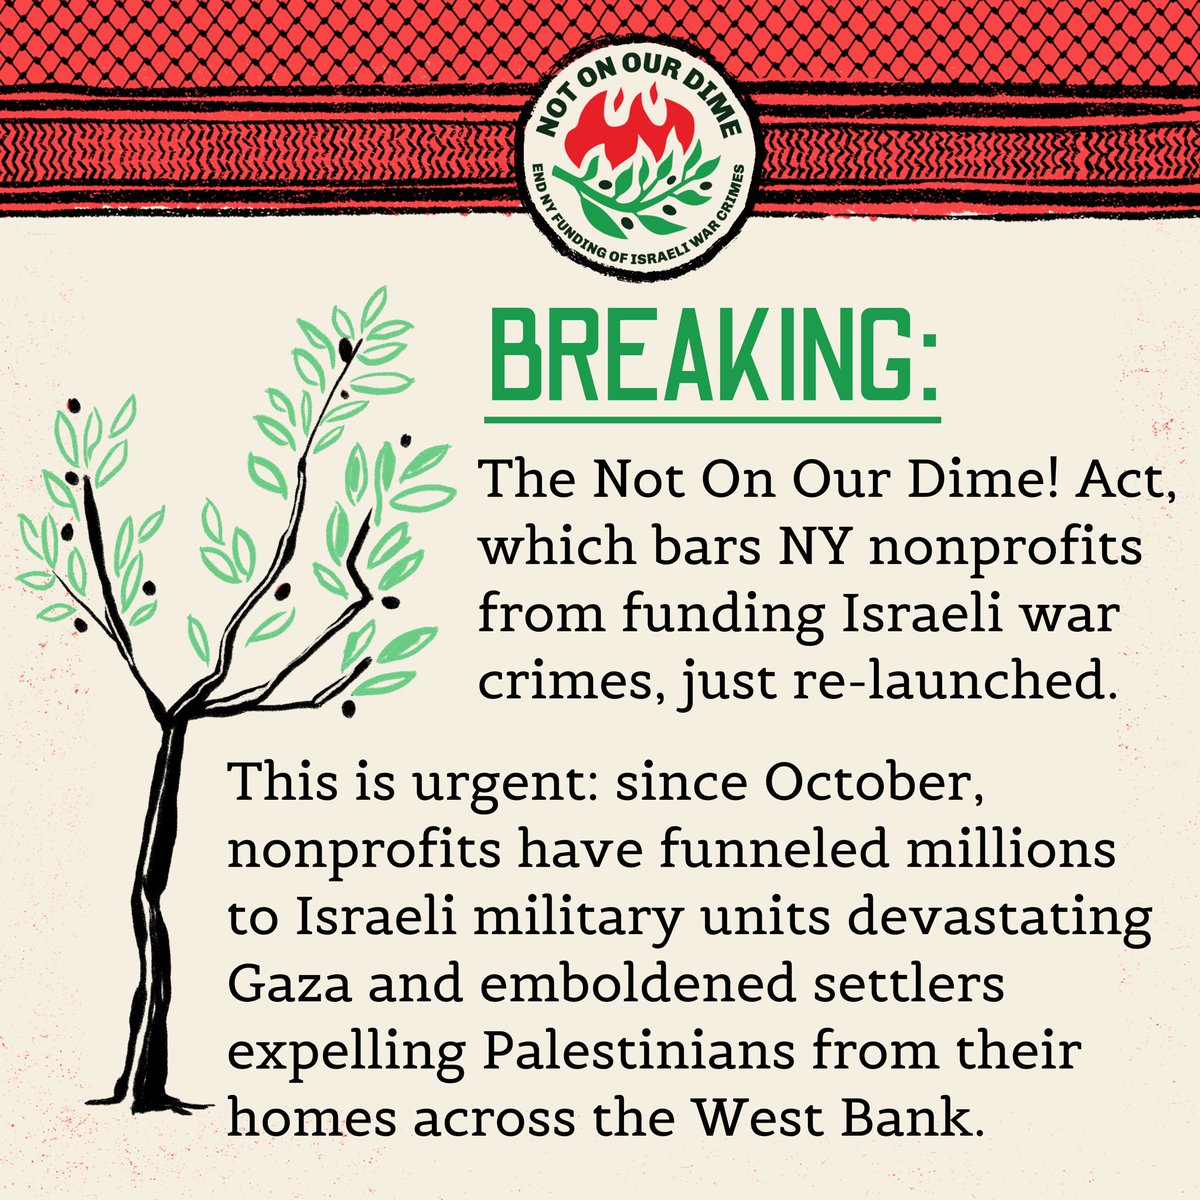 BREAKING: The Not On Our Dime! Act, which bars NY nonprofits from funding Israeli war crimes, was just re-launched. Follow @NotOnOurDimeNY on Instagram and Twitter to get involved in the campaign!